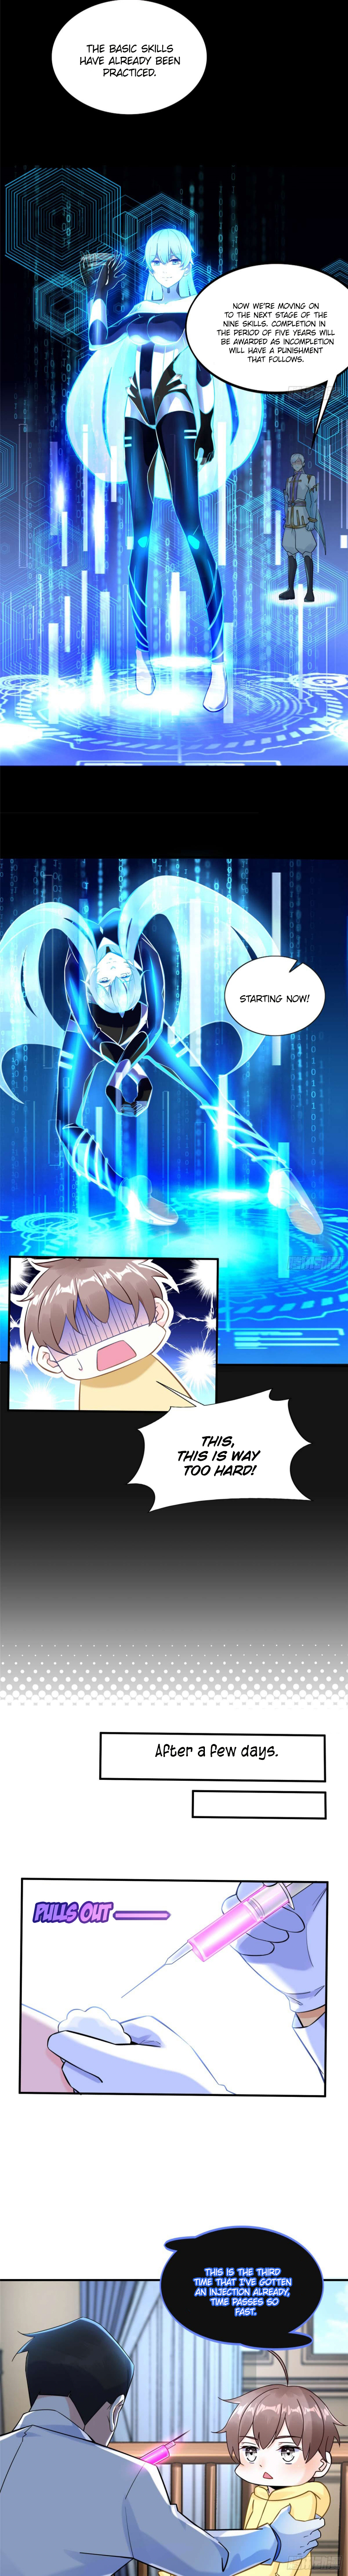 It's Not Easy to Be a Man After Traveling to the Future Ch. 7 Redeeming the Rabbit Kick Skill